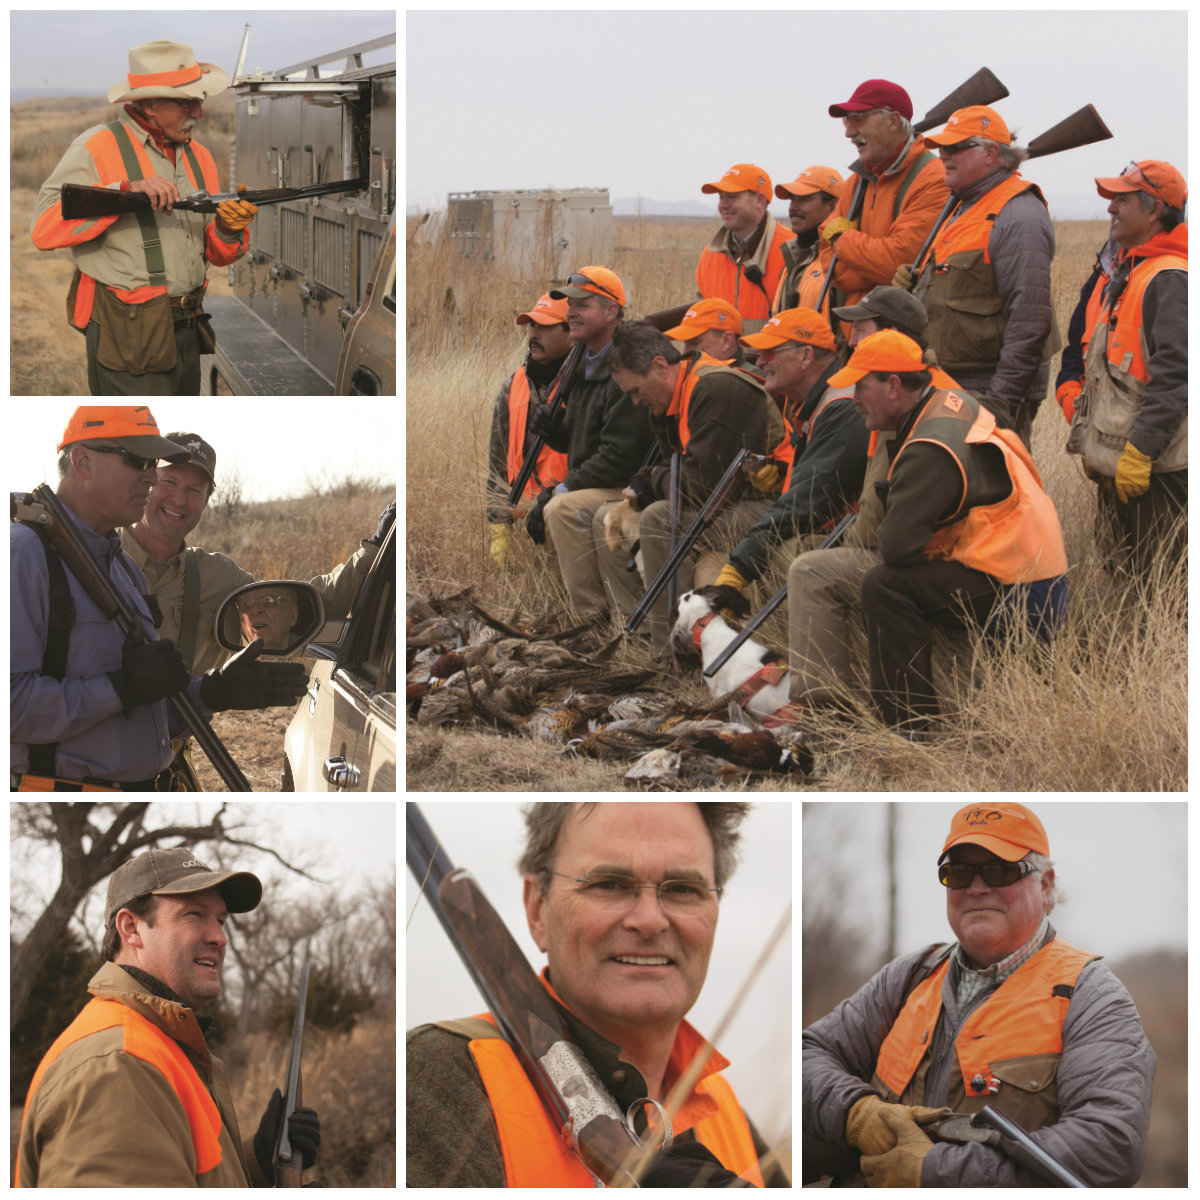 Clockwise from upper right: The Legends of Quail Hunters; National Skeet Shooters Hall of Famer Rick Pope; Park Cities Quail cofounder Joe Crafton; Covey Rise Publisher John Thames; WFAA’s Pete Delkus and John Thames chat with Boone Pickens; Rolling Plains Quail Research Ranch founding member Rick Snipes. All of the Legends are ardent supporters of Park Cities Quail, a non-profit that has raised more than $6 million for quail conservation over the last decade. During that time, the Mesa Vista Ranch has been the top cooperating ranch for research.